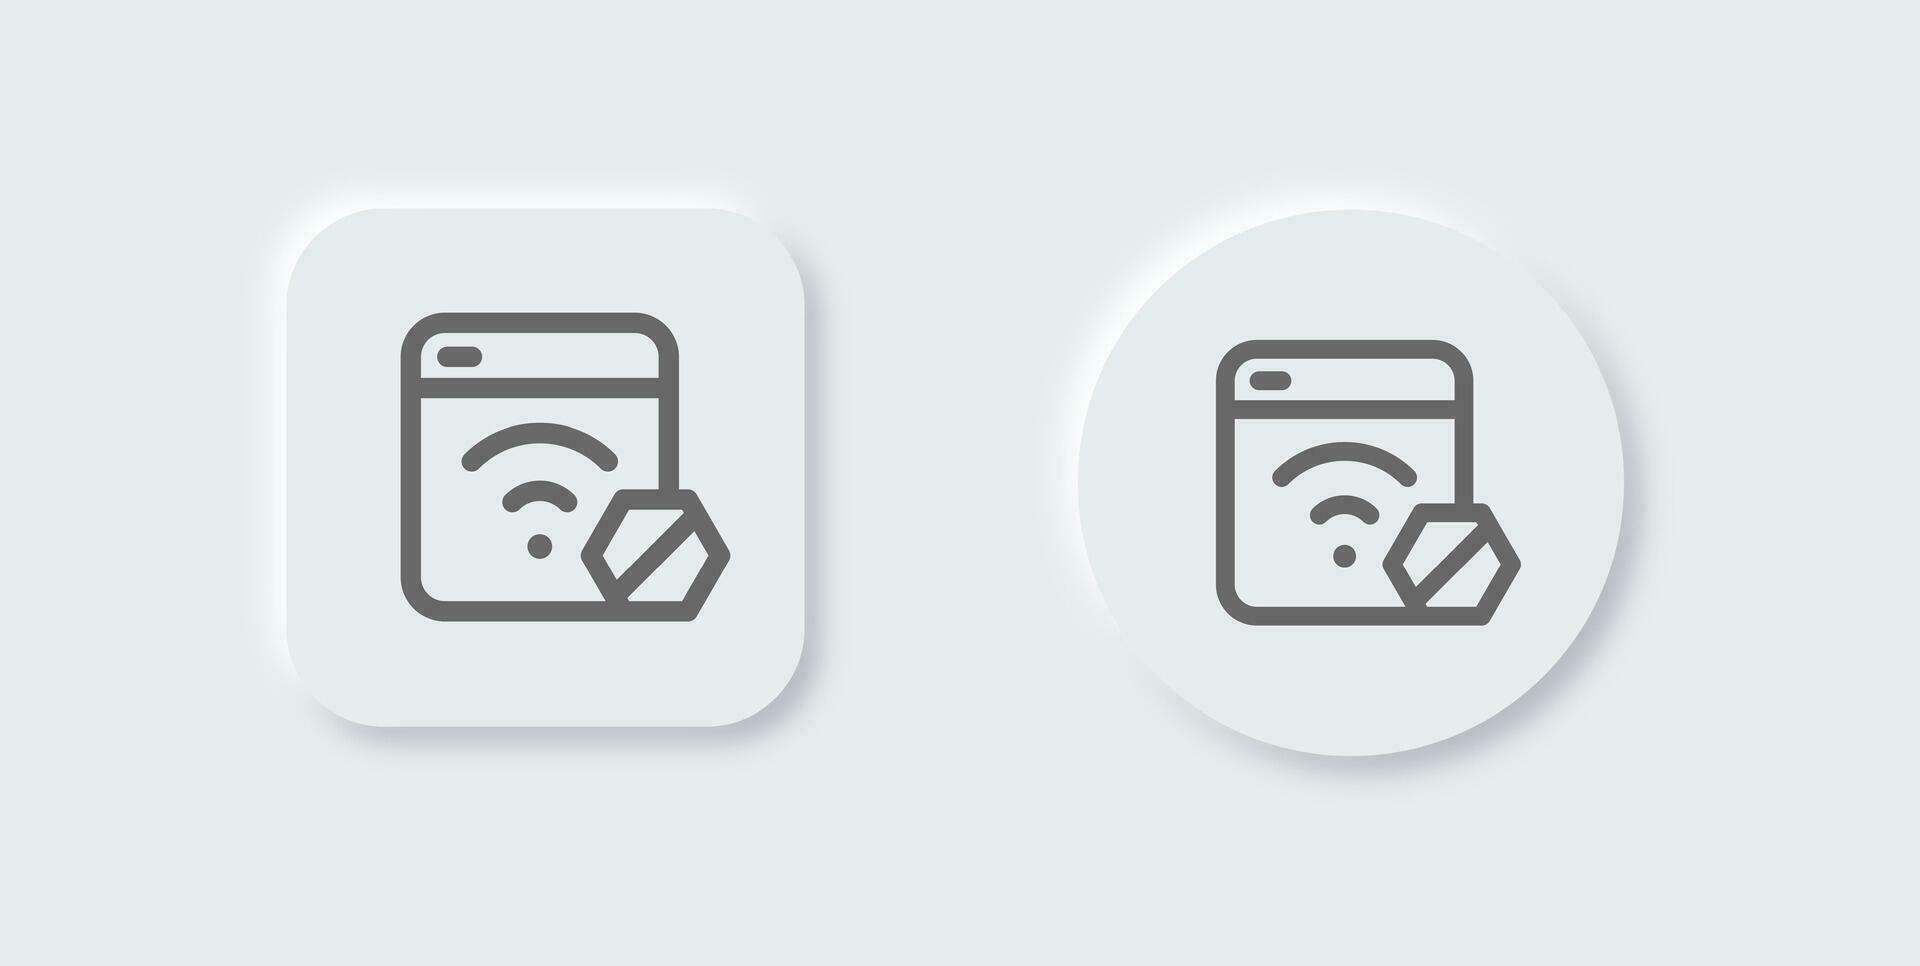 Wifi block line icon in neomorphic design style. Wireless signs vector illustration.